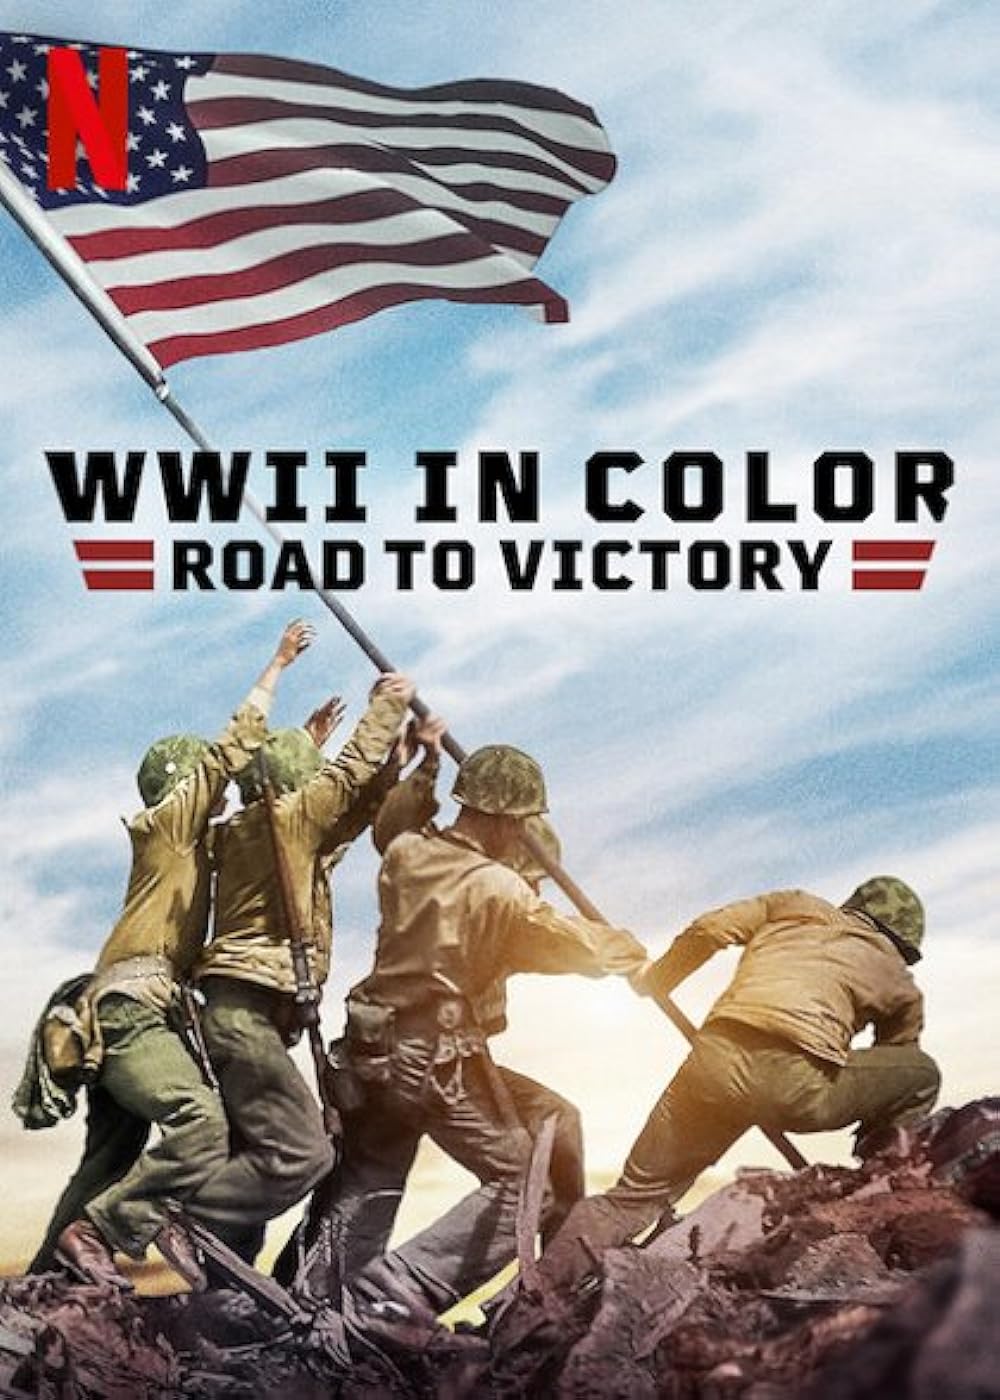 WWII in Color: Road to Victory (2021) S1 EP6 The Liberation of Paris 128Kbps 25Fps 48Khz 2.0Ch DD+ NF E-AC3 Turkish Audio TAC